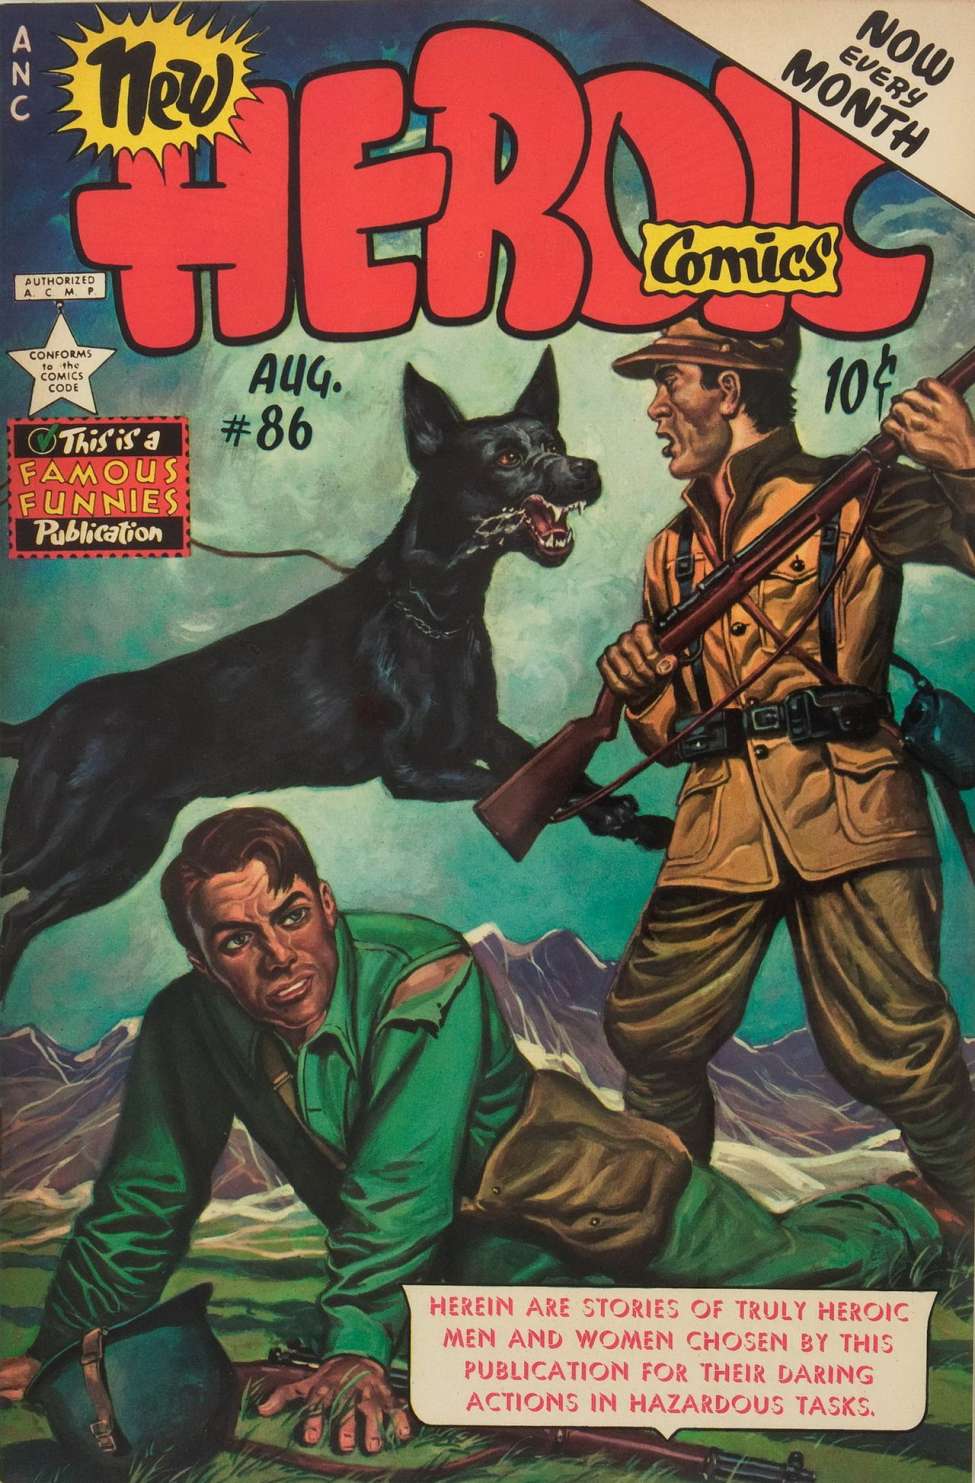 Comic Book Cover For New Heroic Comics 86 - Version 1